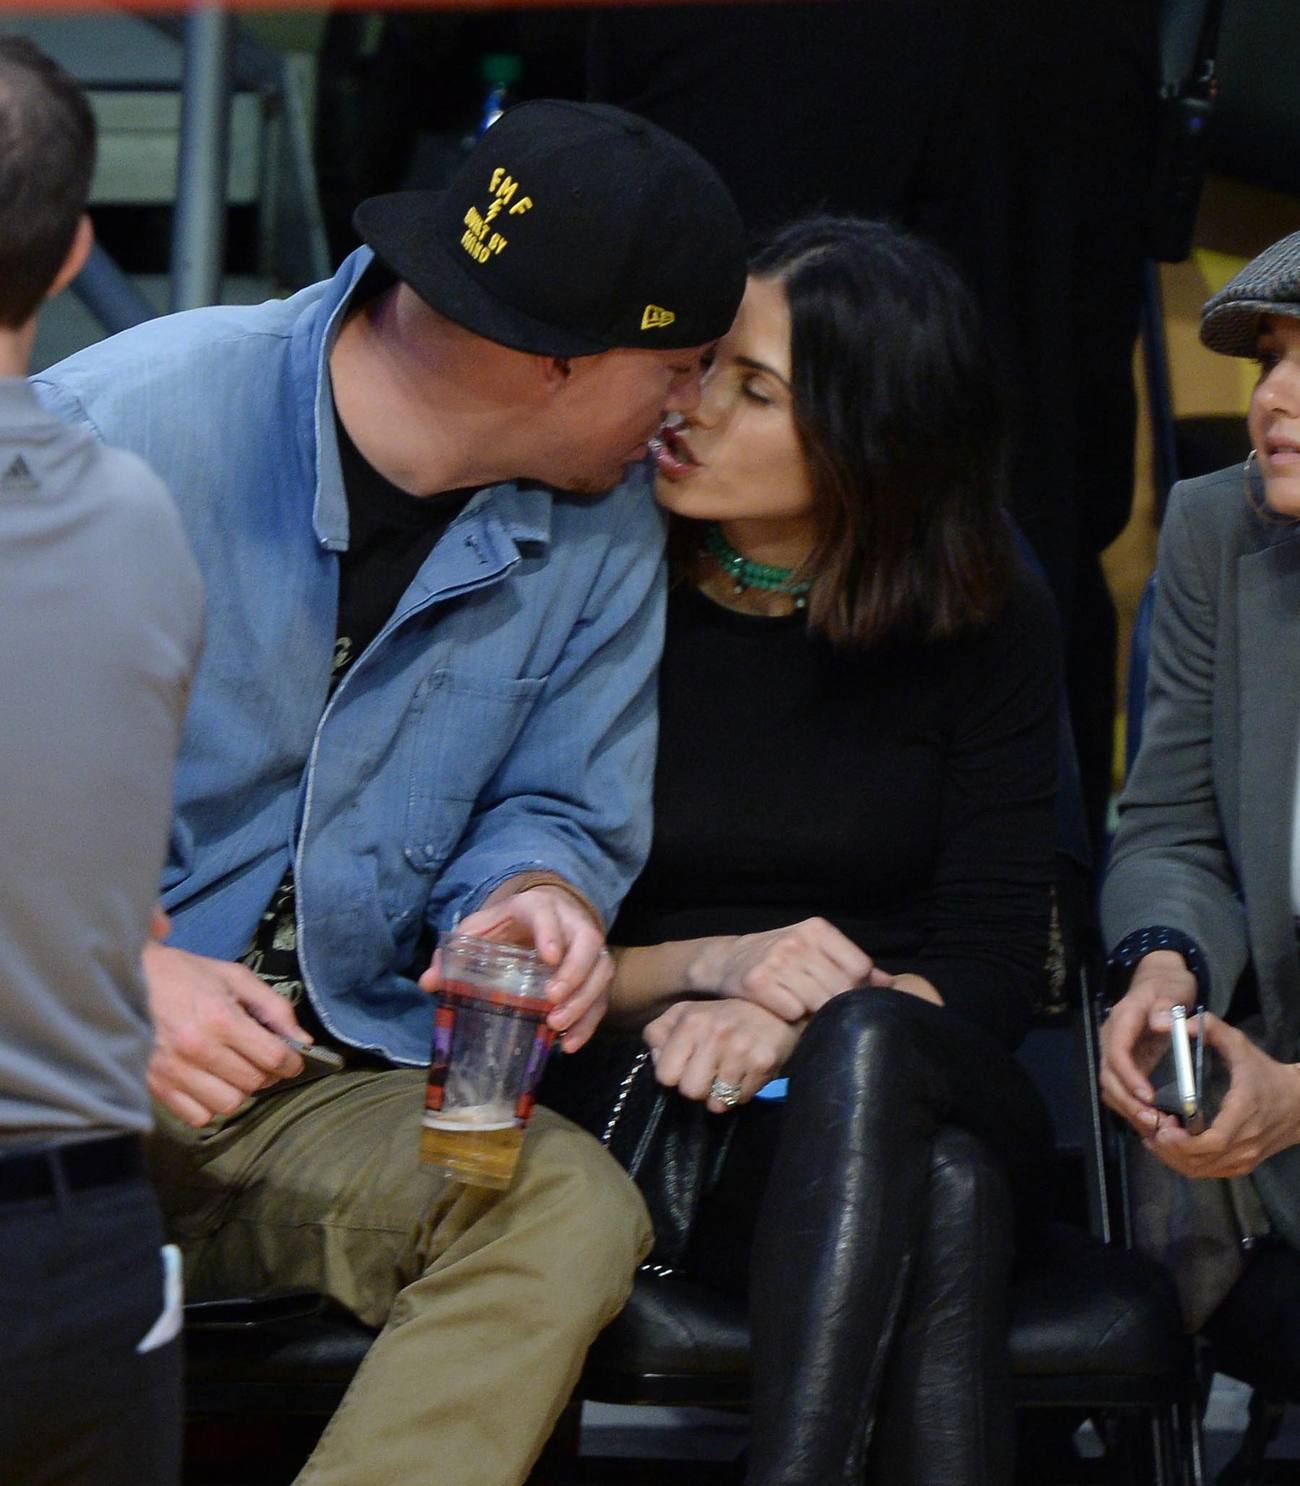 Trio Channing Tatum, Jenna Dewan and Emmanuelle Chriqui Watch Lakers Game at Staples Center